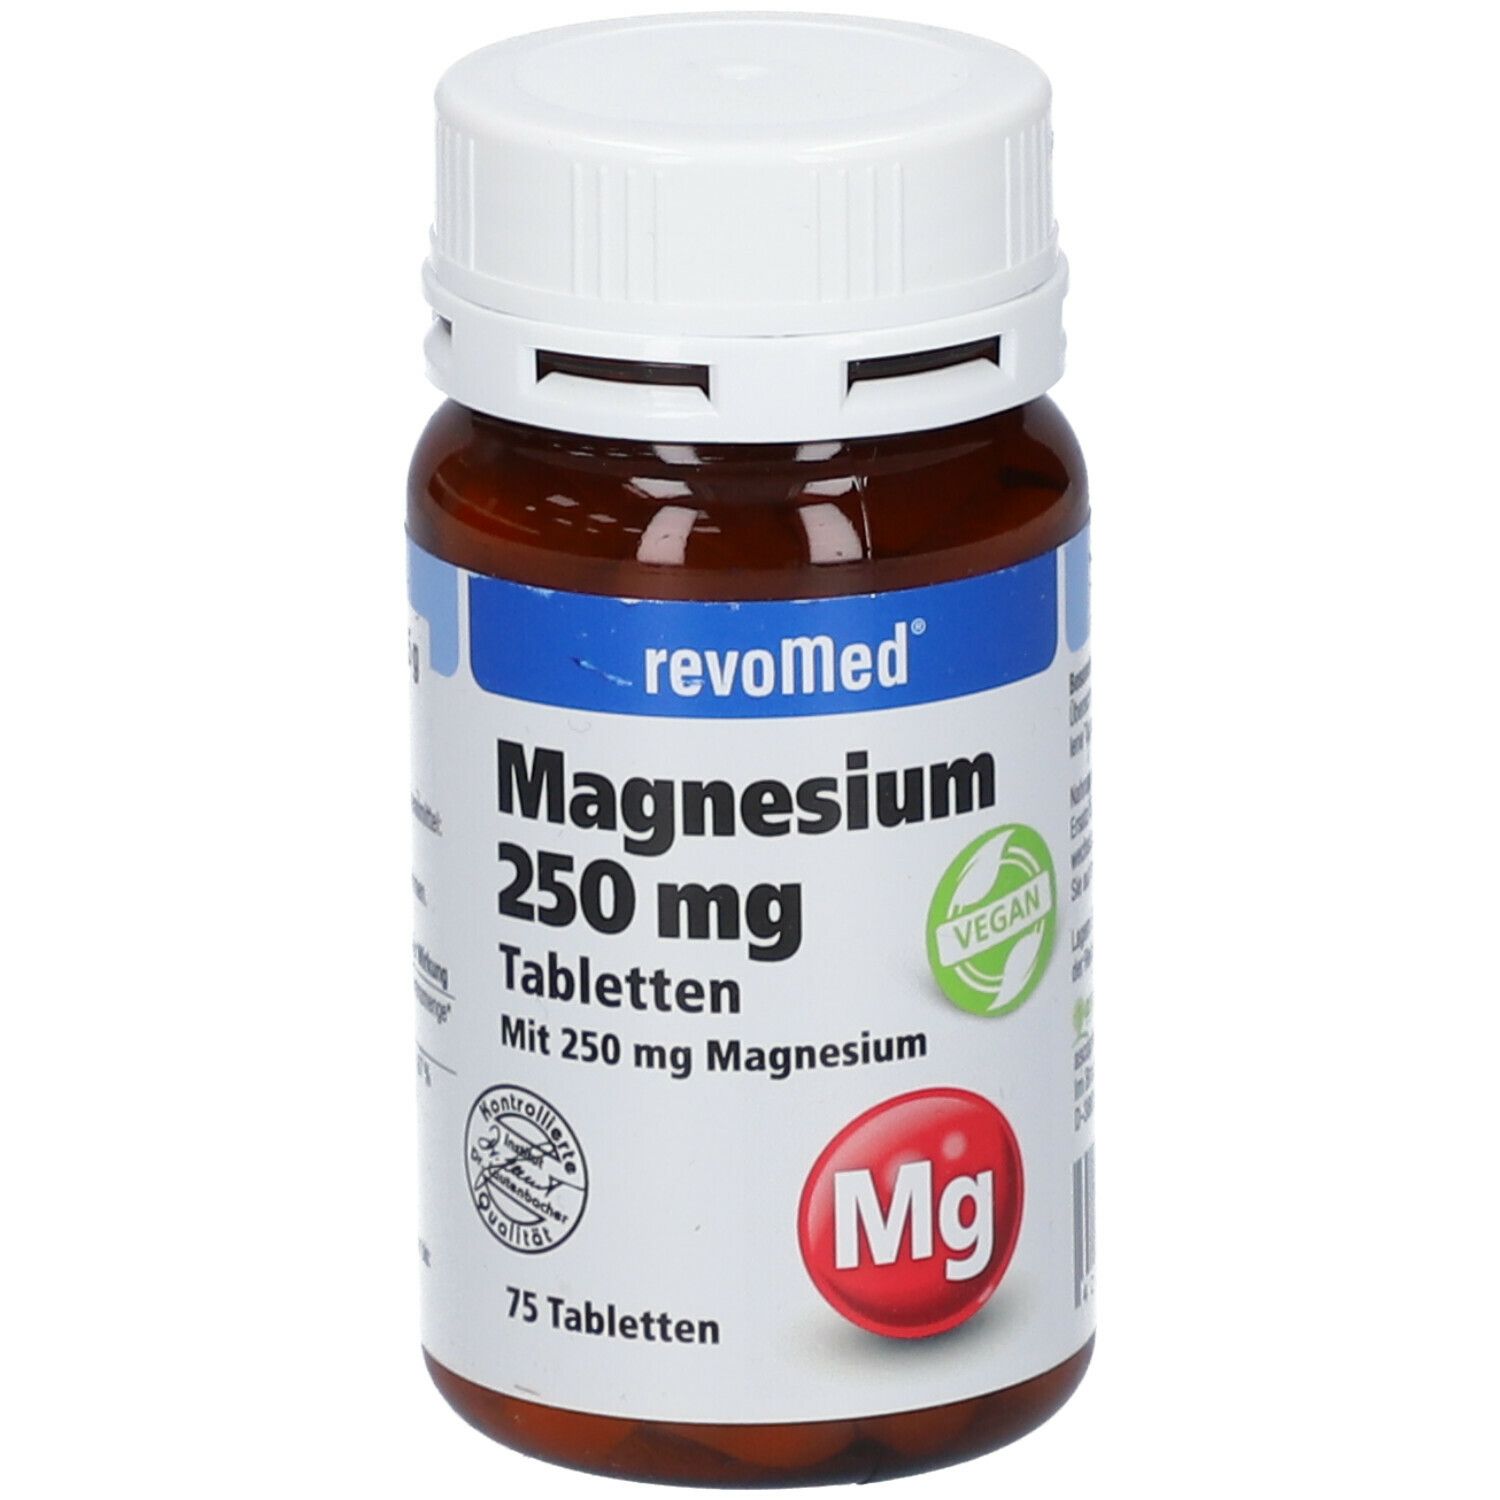 Image of revoMed Magnesium 250 mg